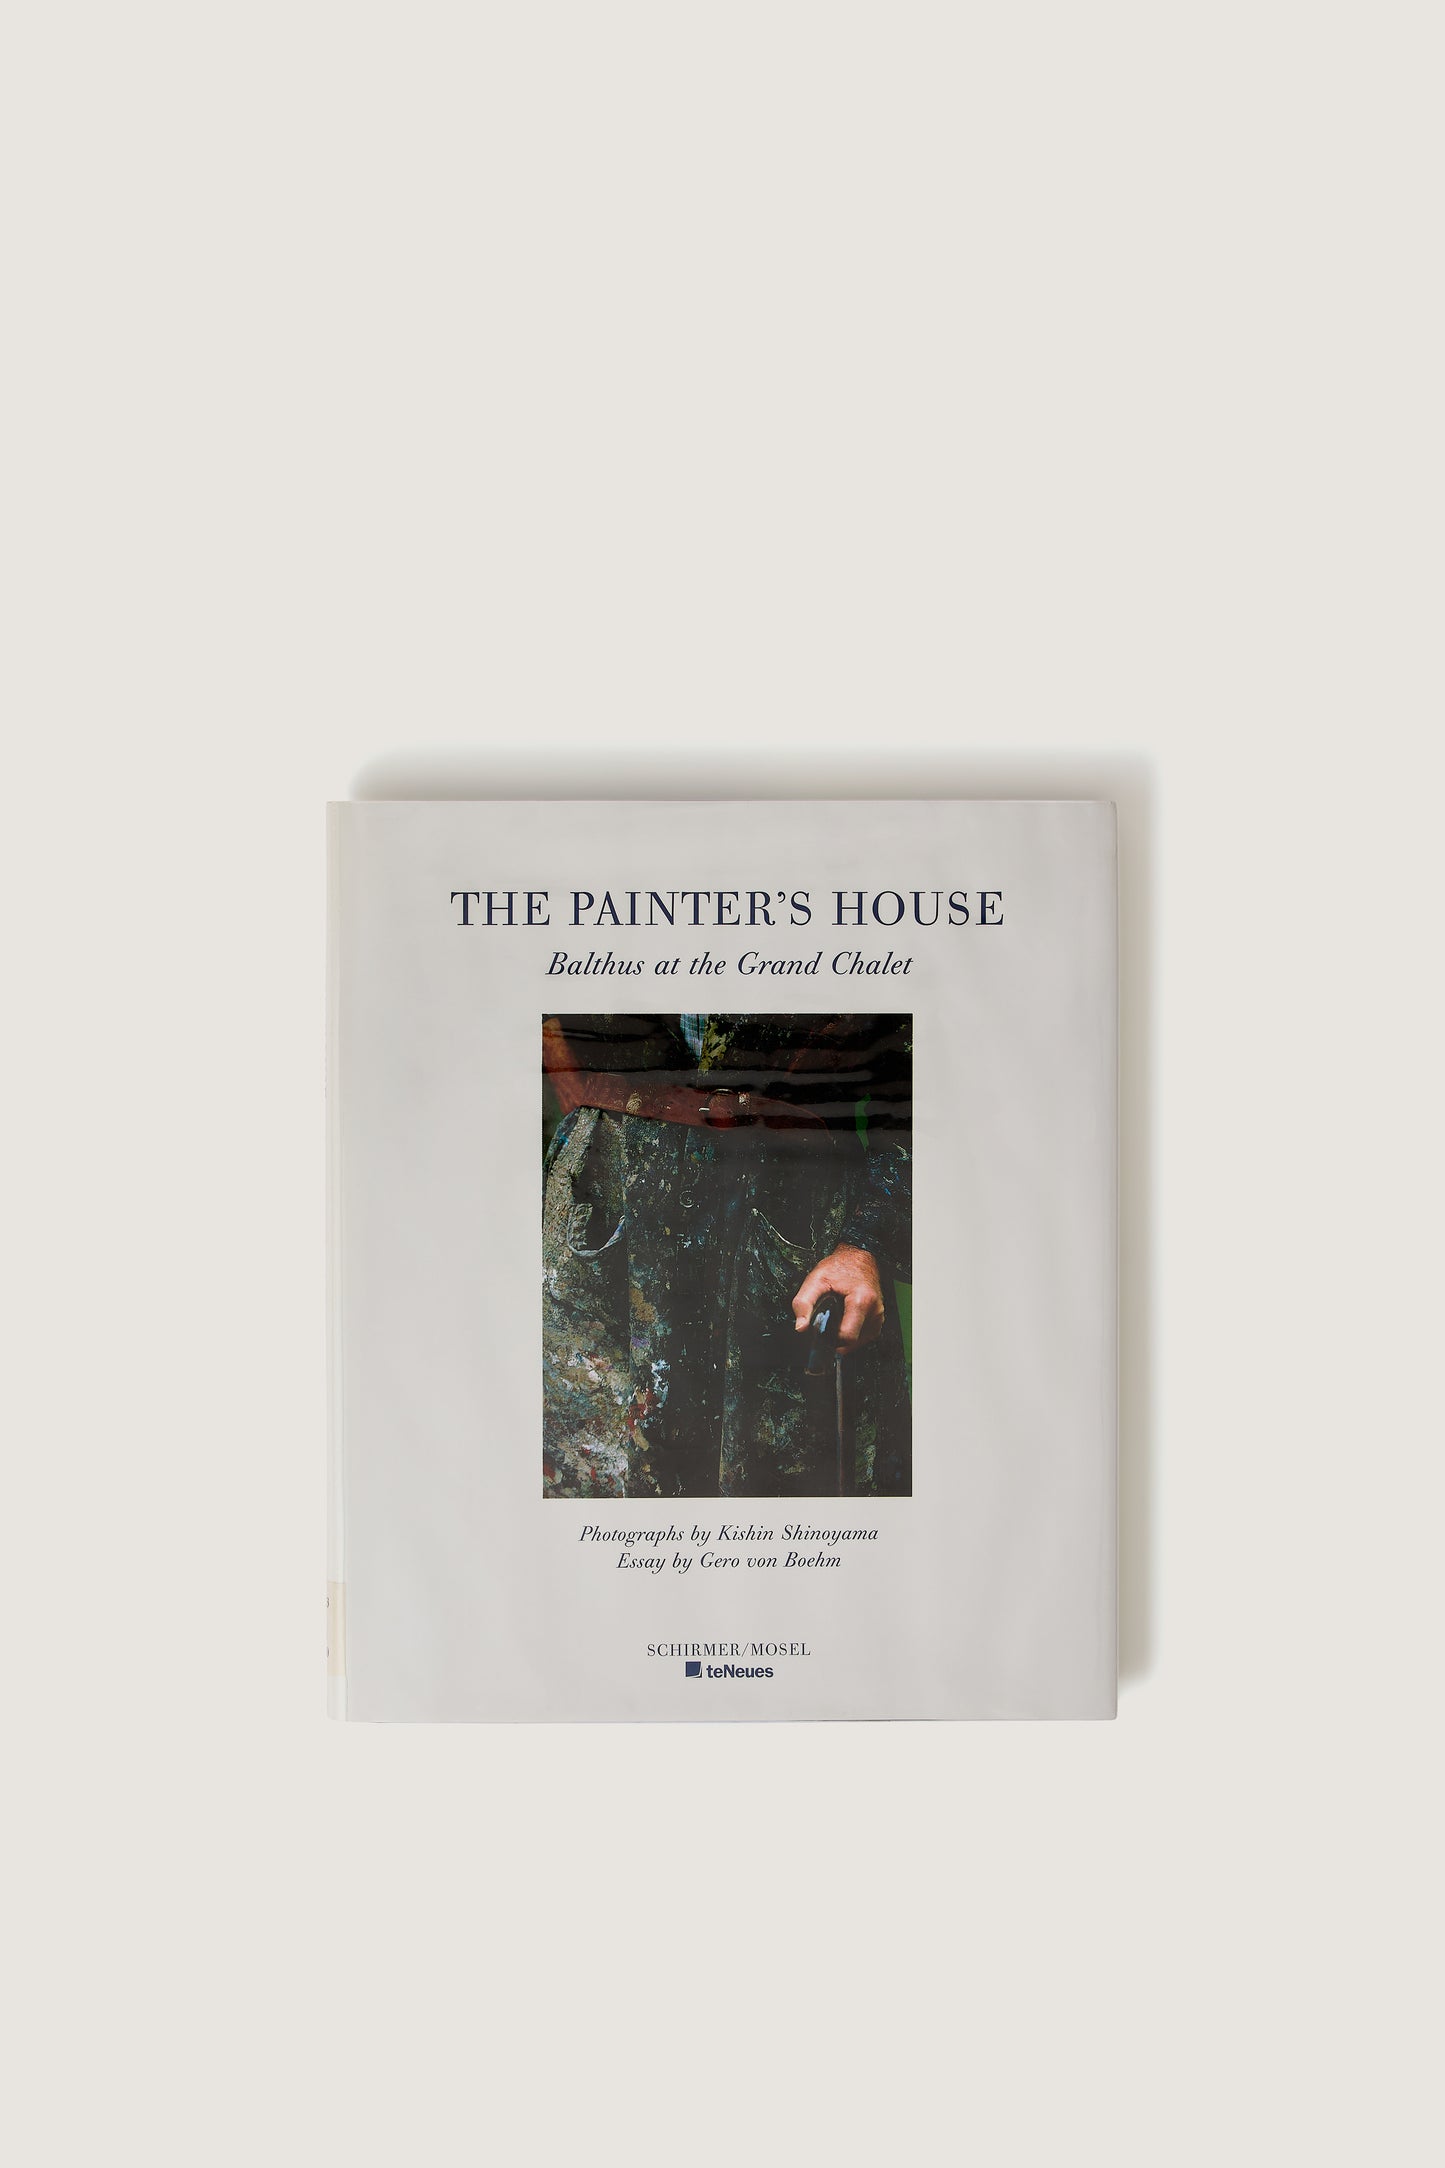 LIVRE "THE PAINTER'S HOUSE : BALTHUS AT THE GRAND CHALET"